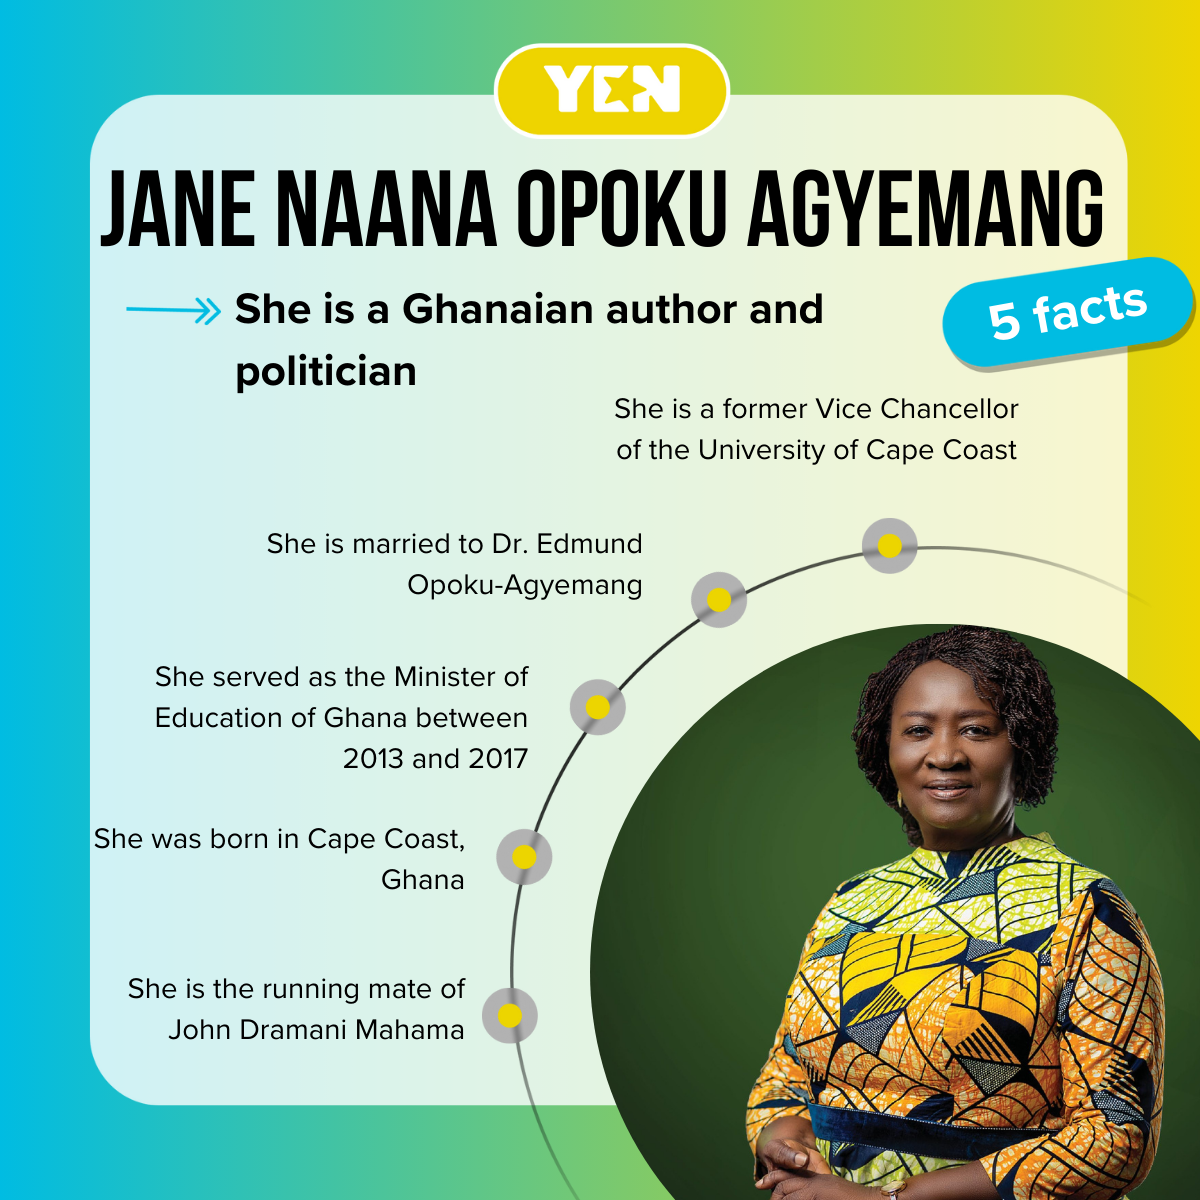 Five facts about Jane Naana Opoku-Agyemang